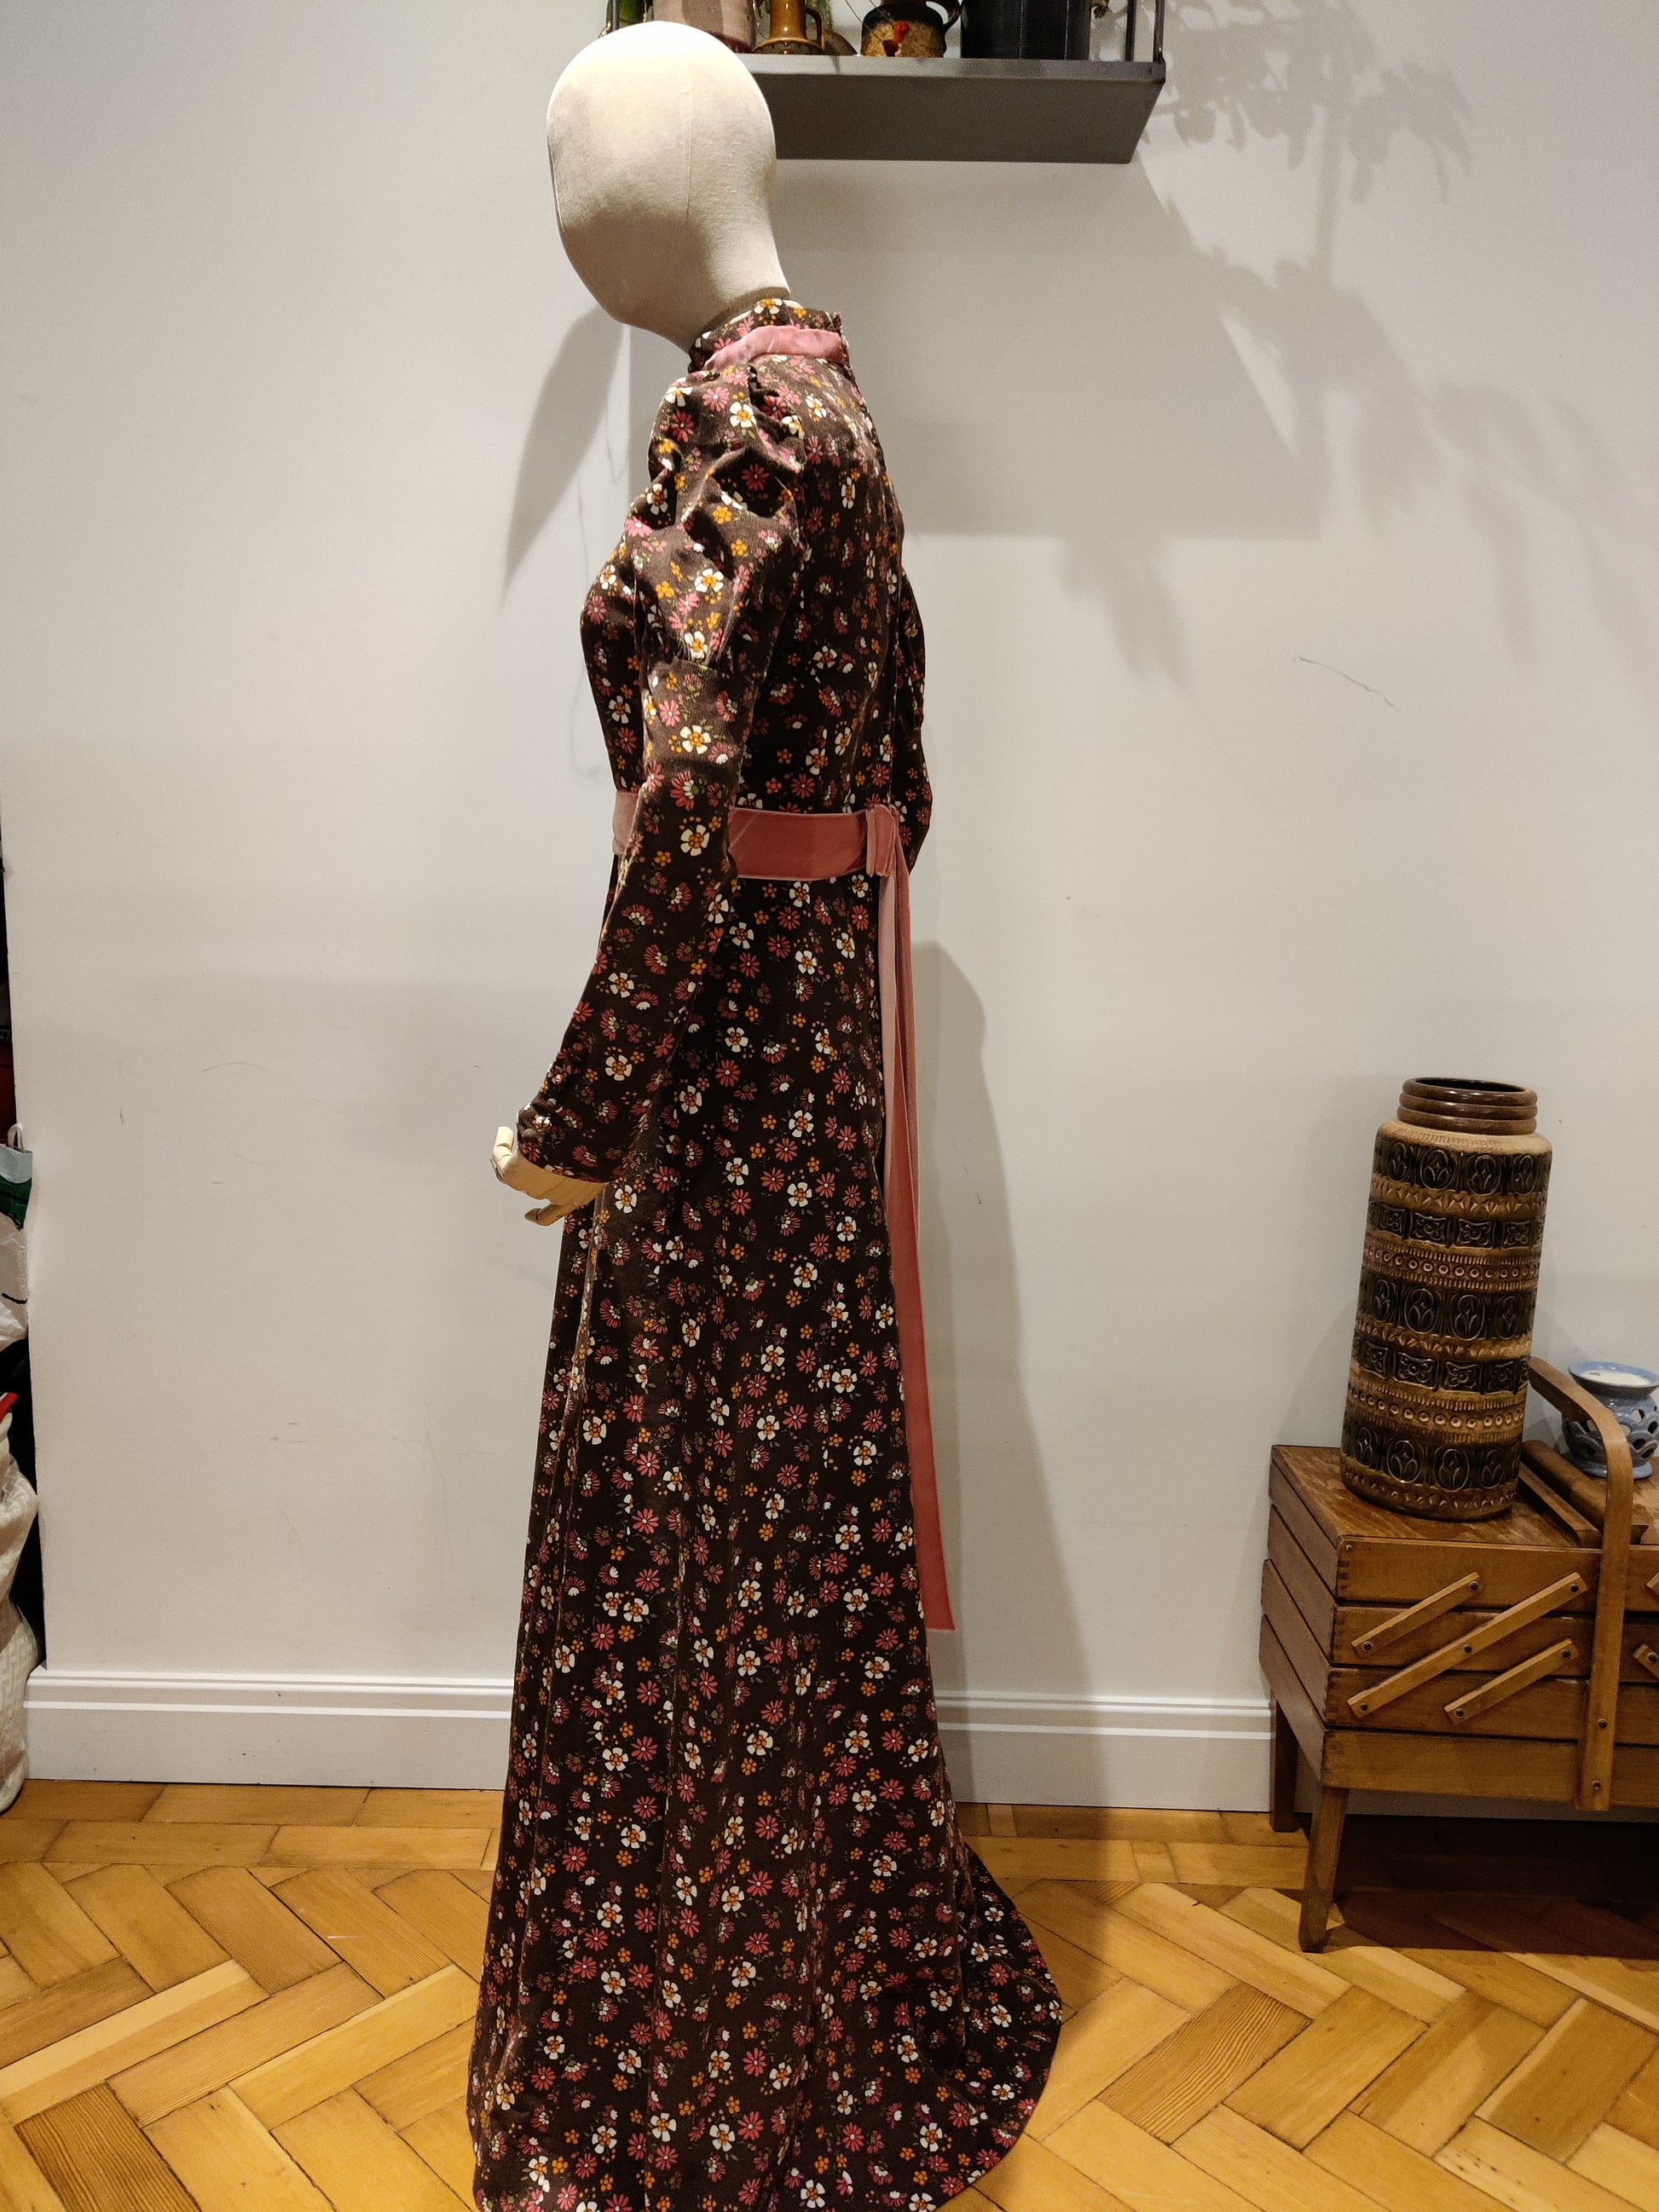 1970s floral maxi dress with leg of mutton sleeves.